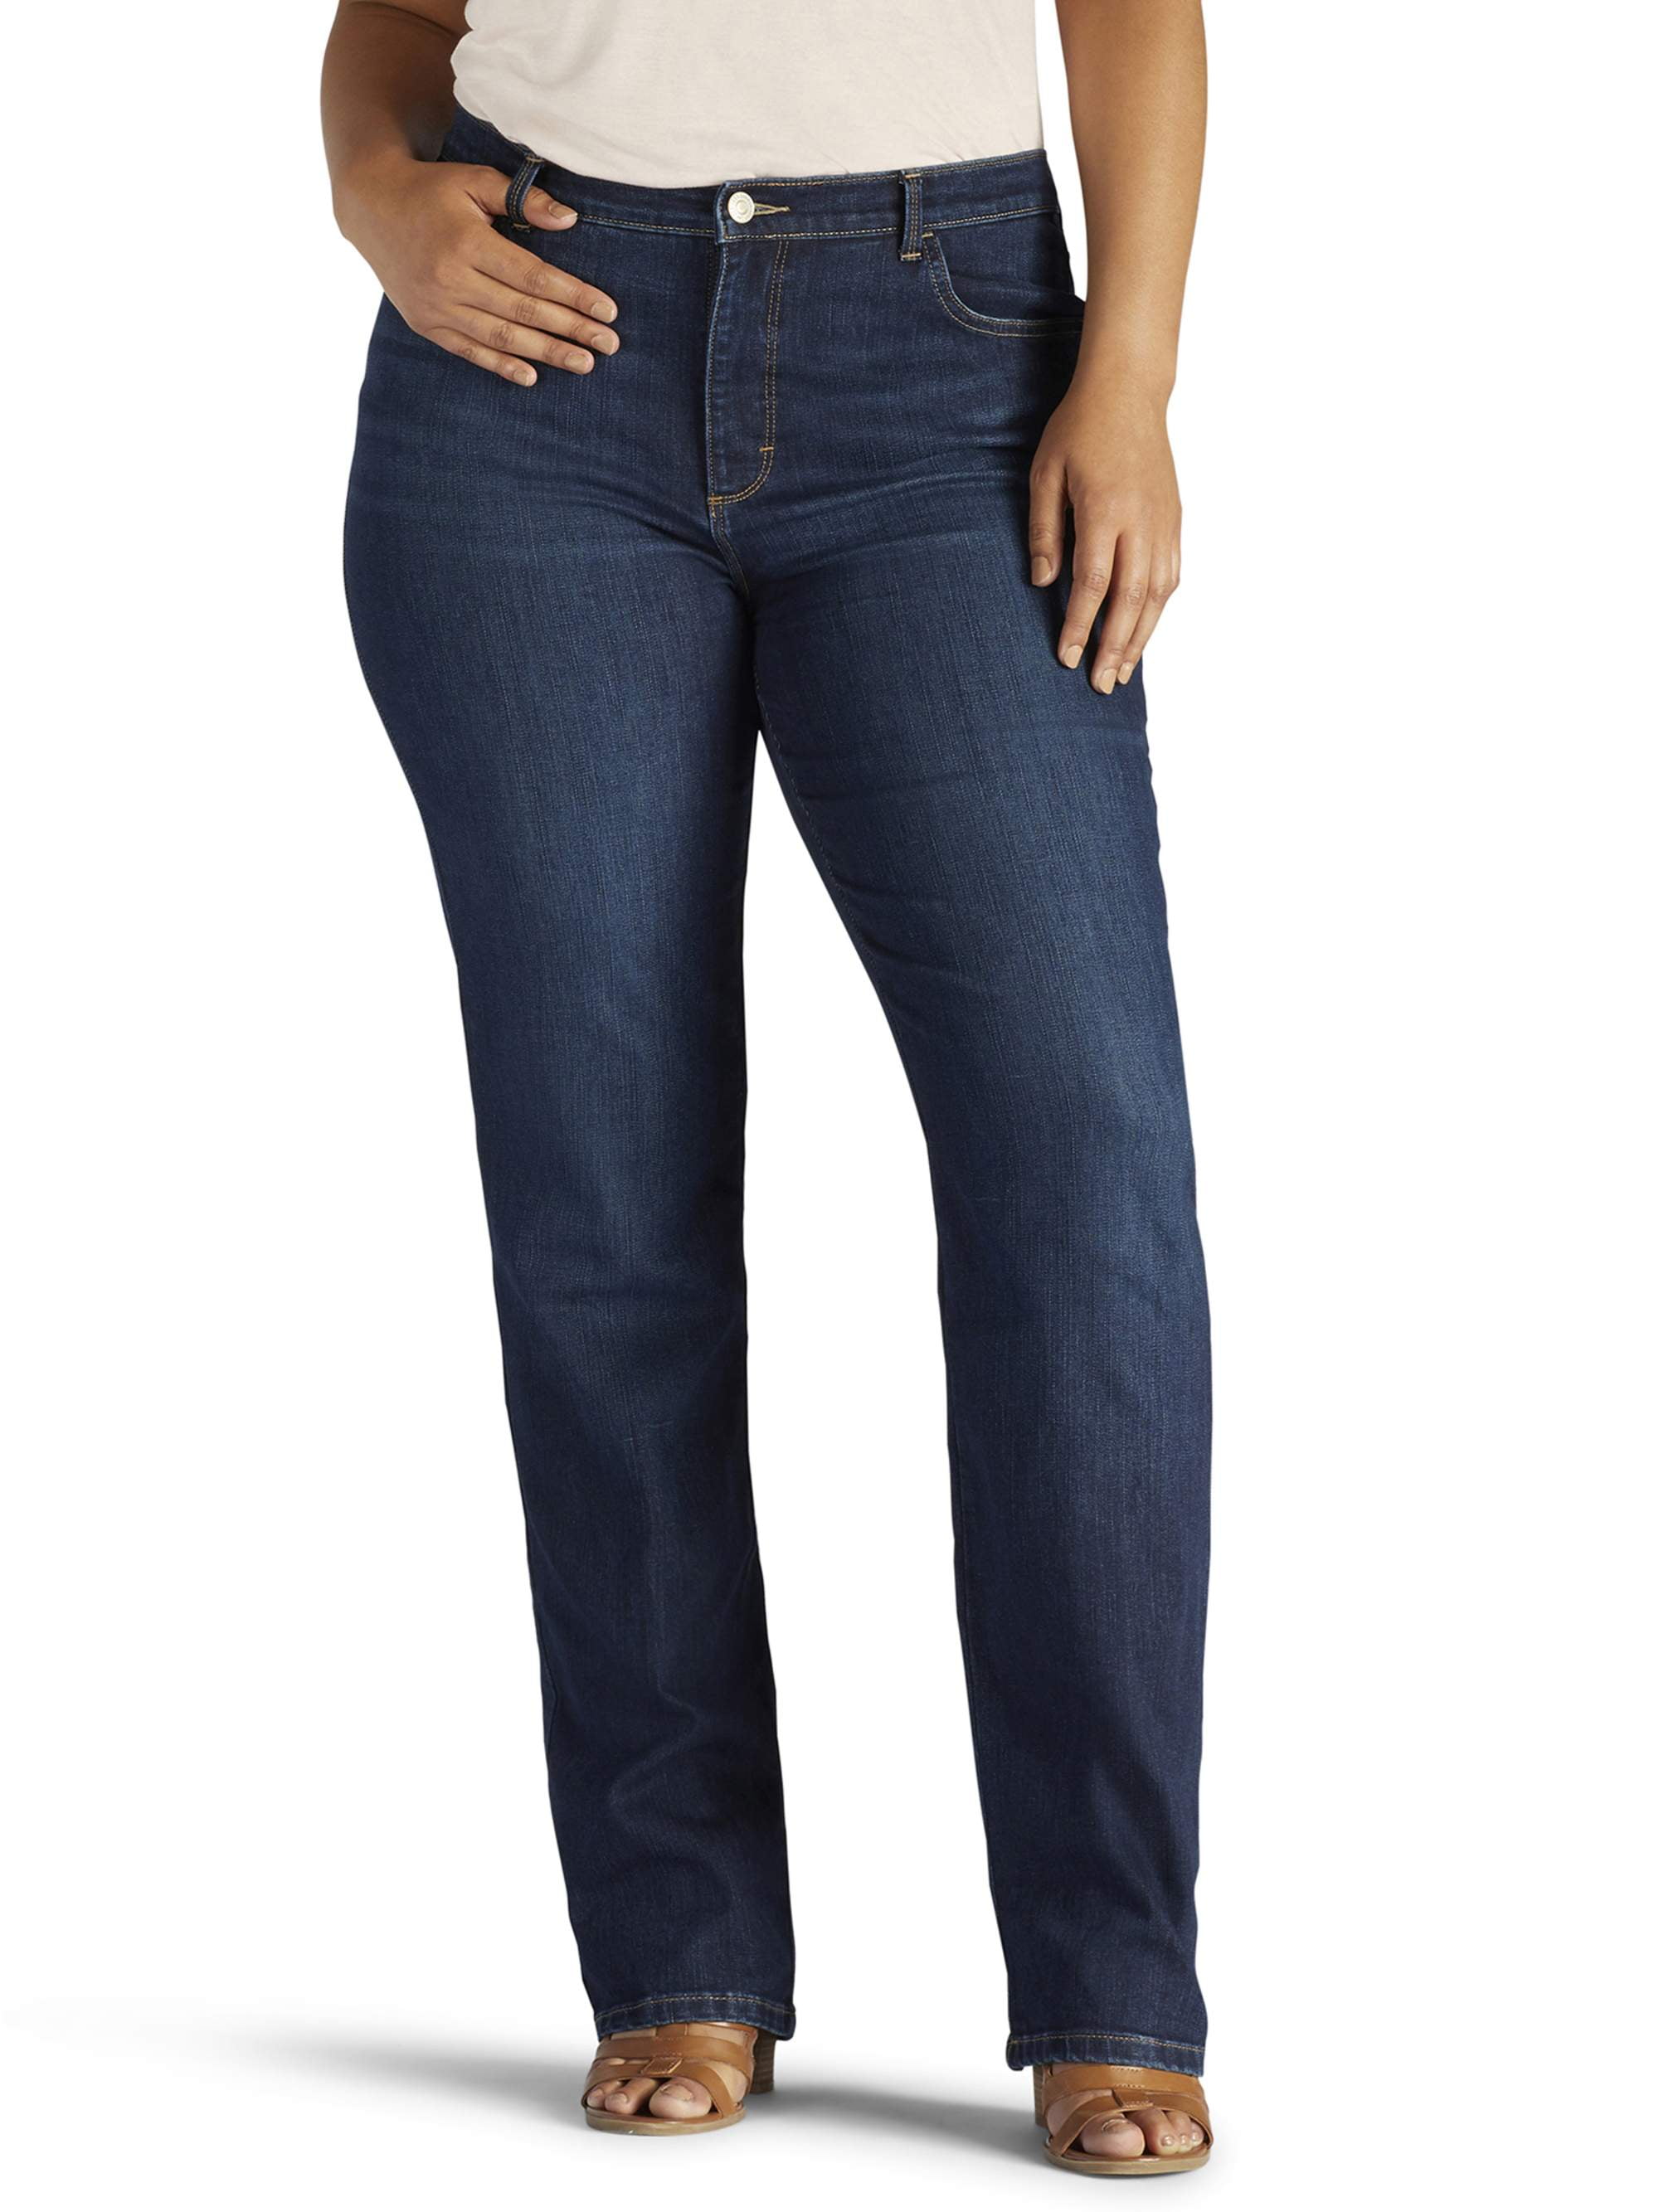 Lee Women's Instantly Slims Relaxed Fit Straight Leg Jean - Walmart.com